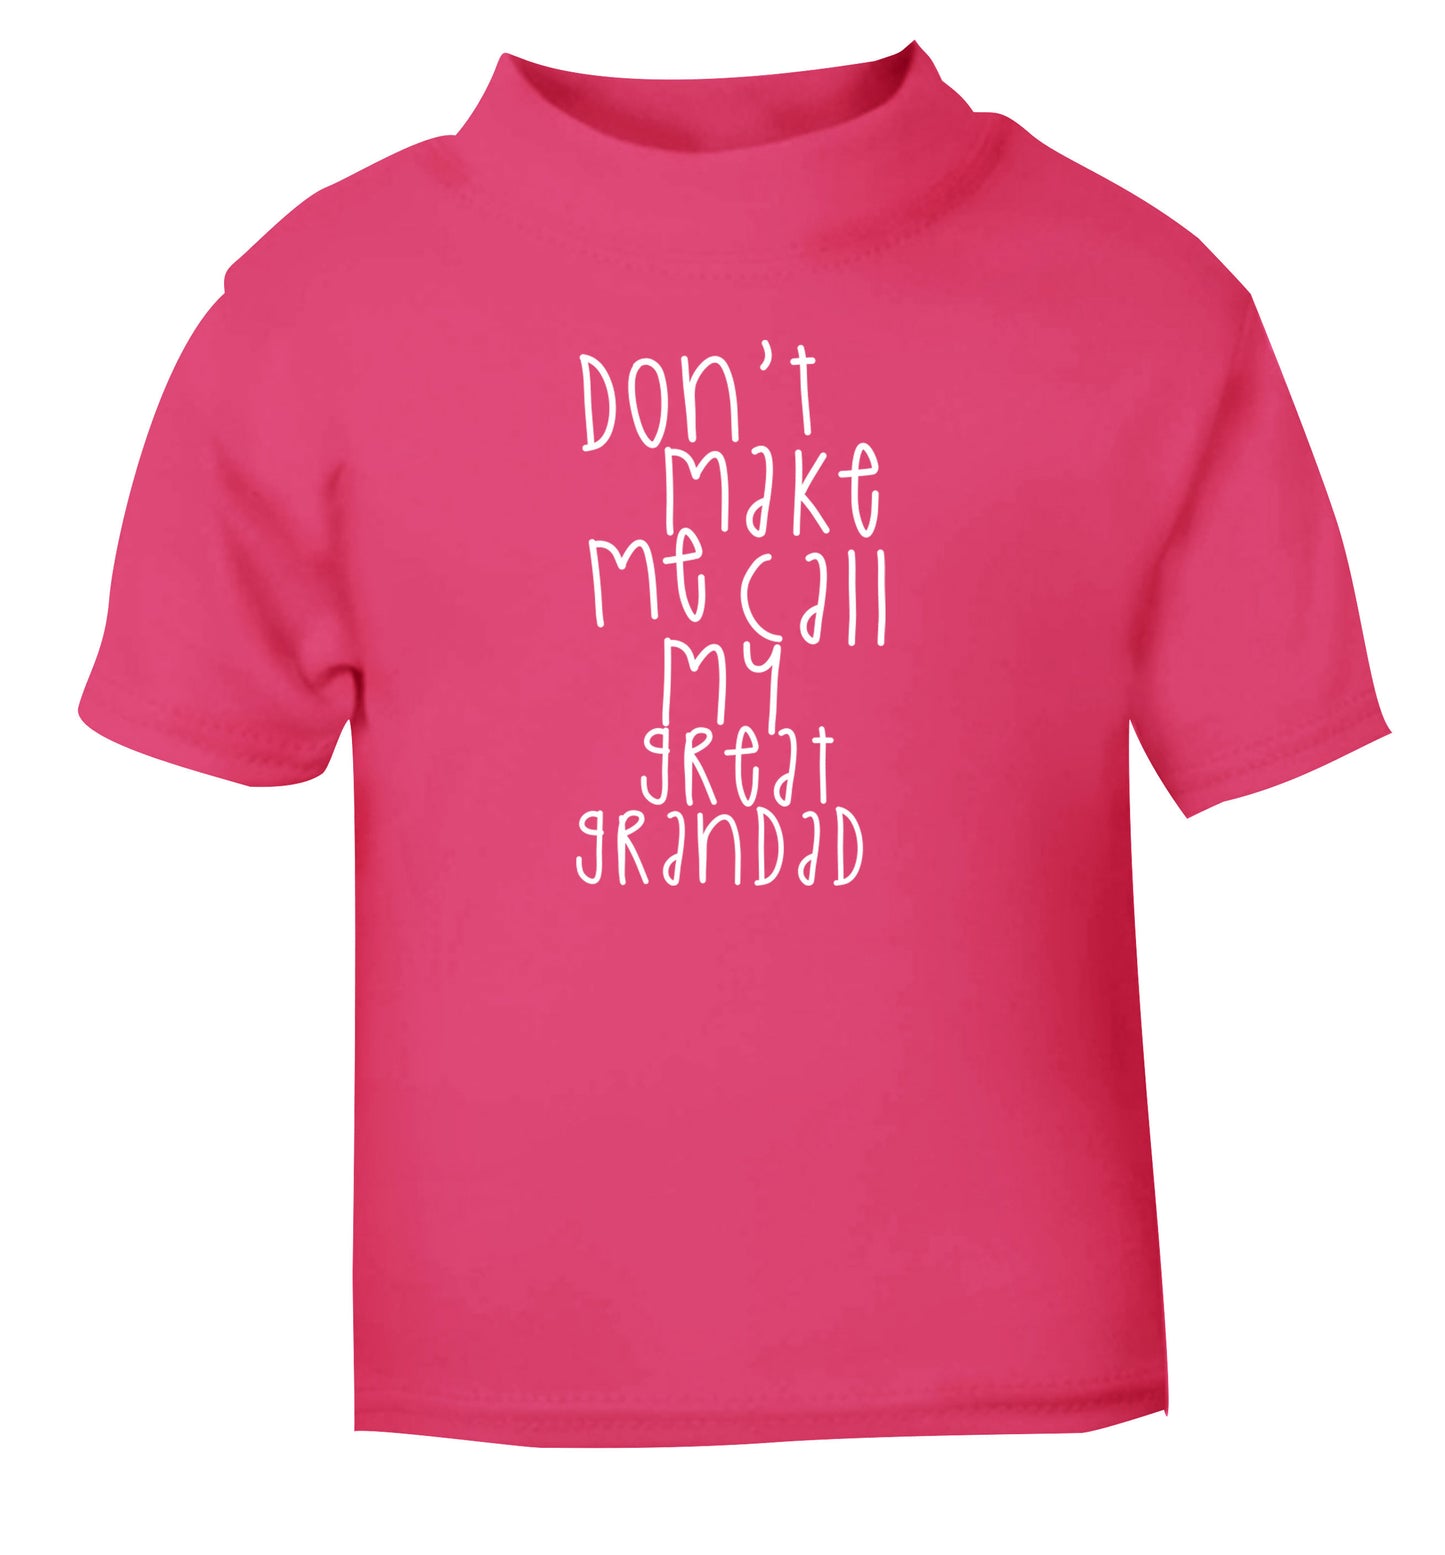 Don't make me call my great grandad pink Baby Toddler Tshirt 2 Years